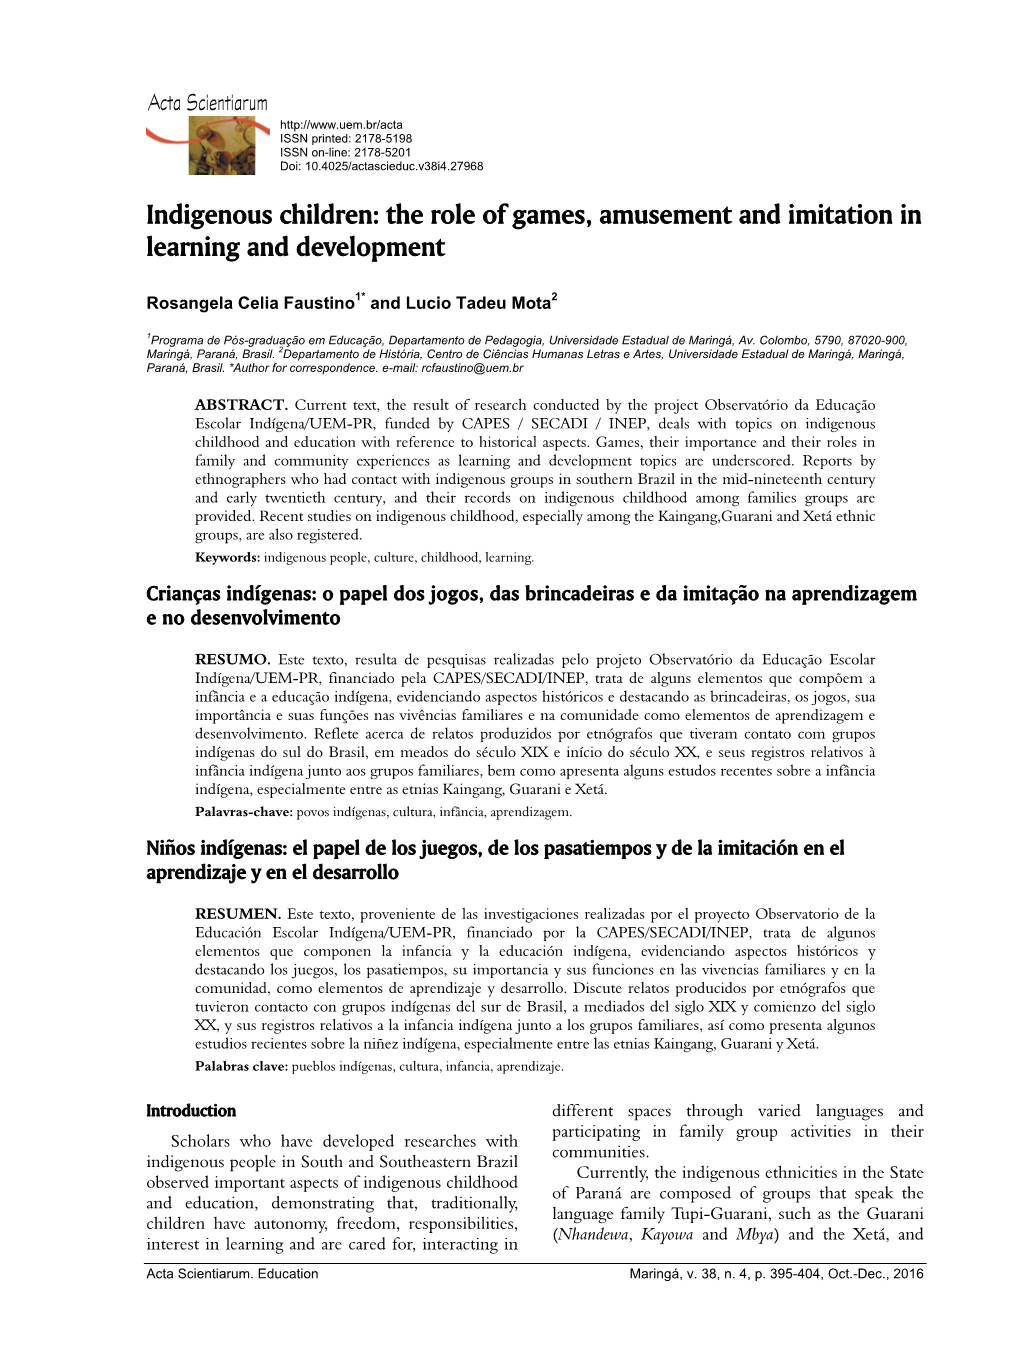 Indigenous Children: the Role of Games, Amusement and Imitation in Learning and Development